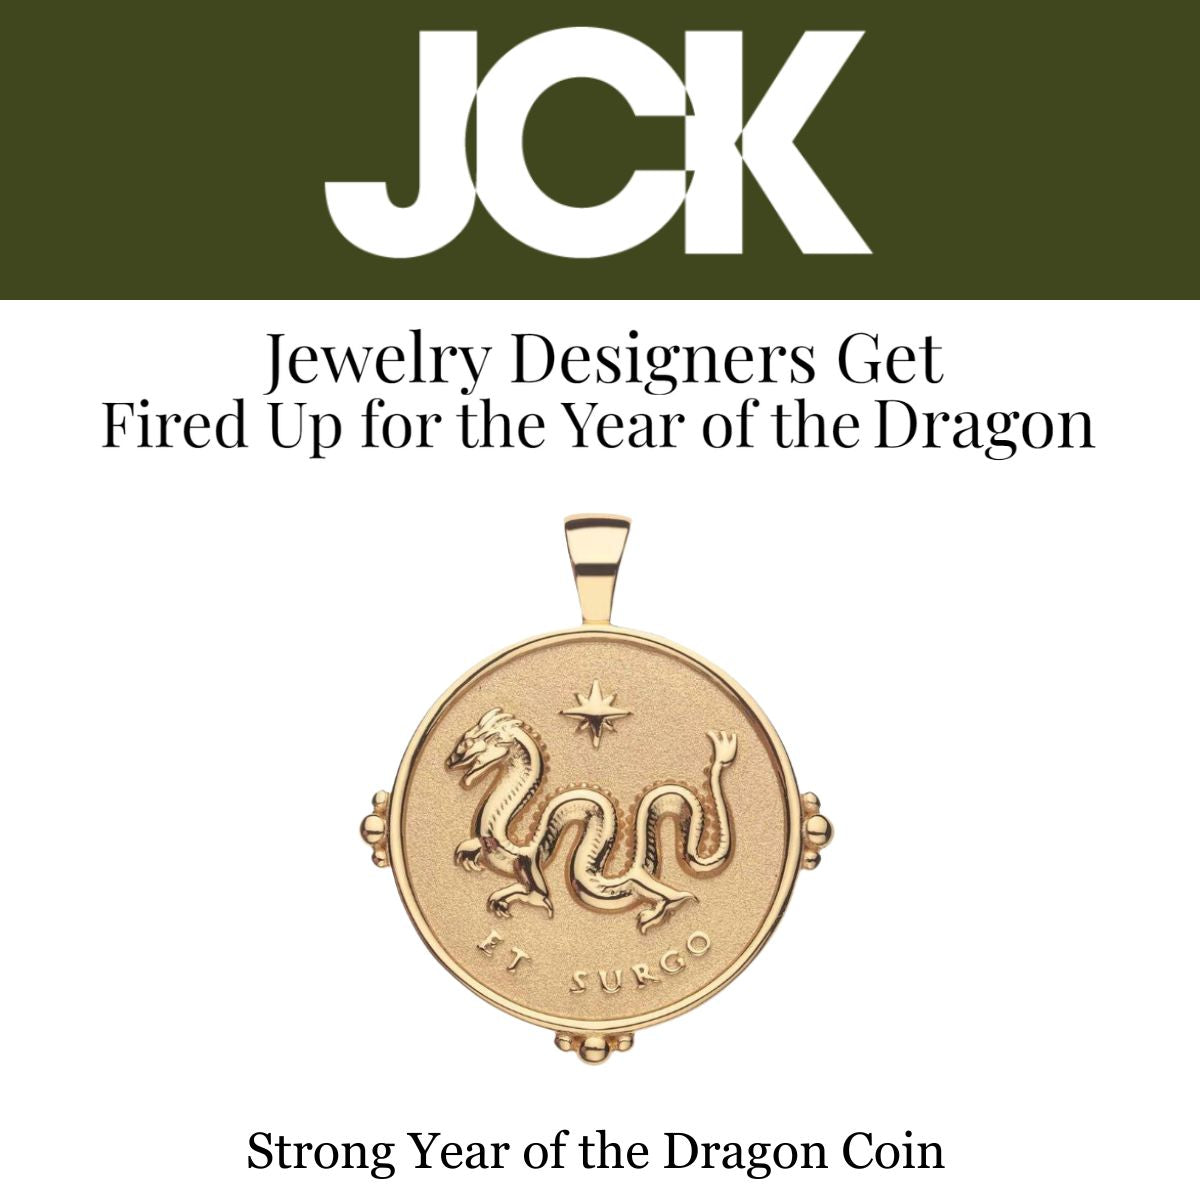 Press Highlight: JCK's "Jewelry Designers Get Fired Up for the Year of the Dragon"